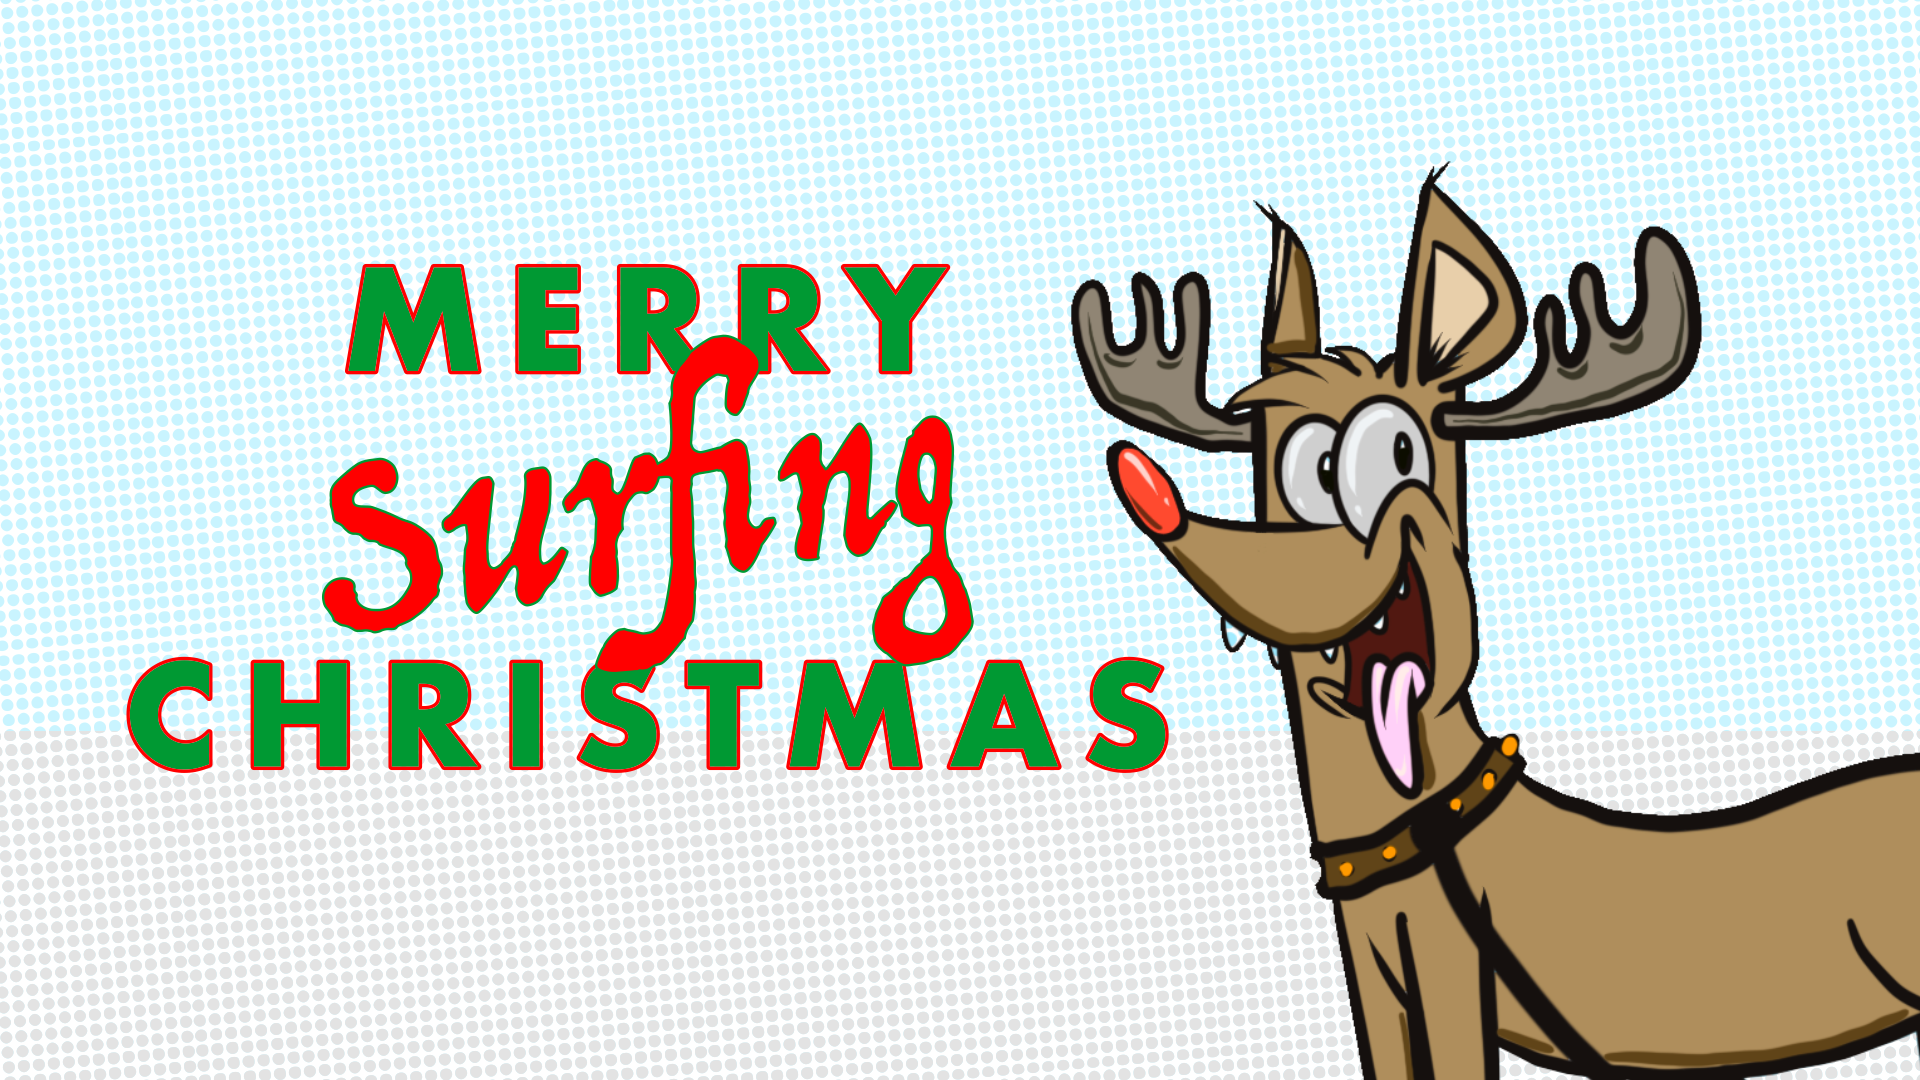 Merry Surfing Christmas Melbourne - Surfboards Surfing Surfers Santa Boogie Boards Surf, URBNSURF, Gifts, wetsuits, repairs, opening retail hours